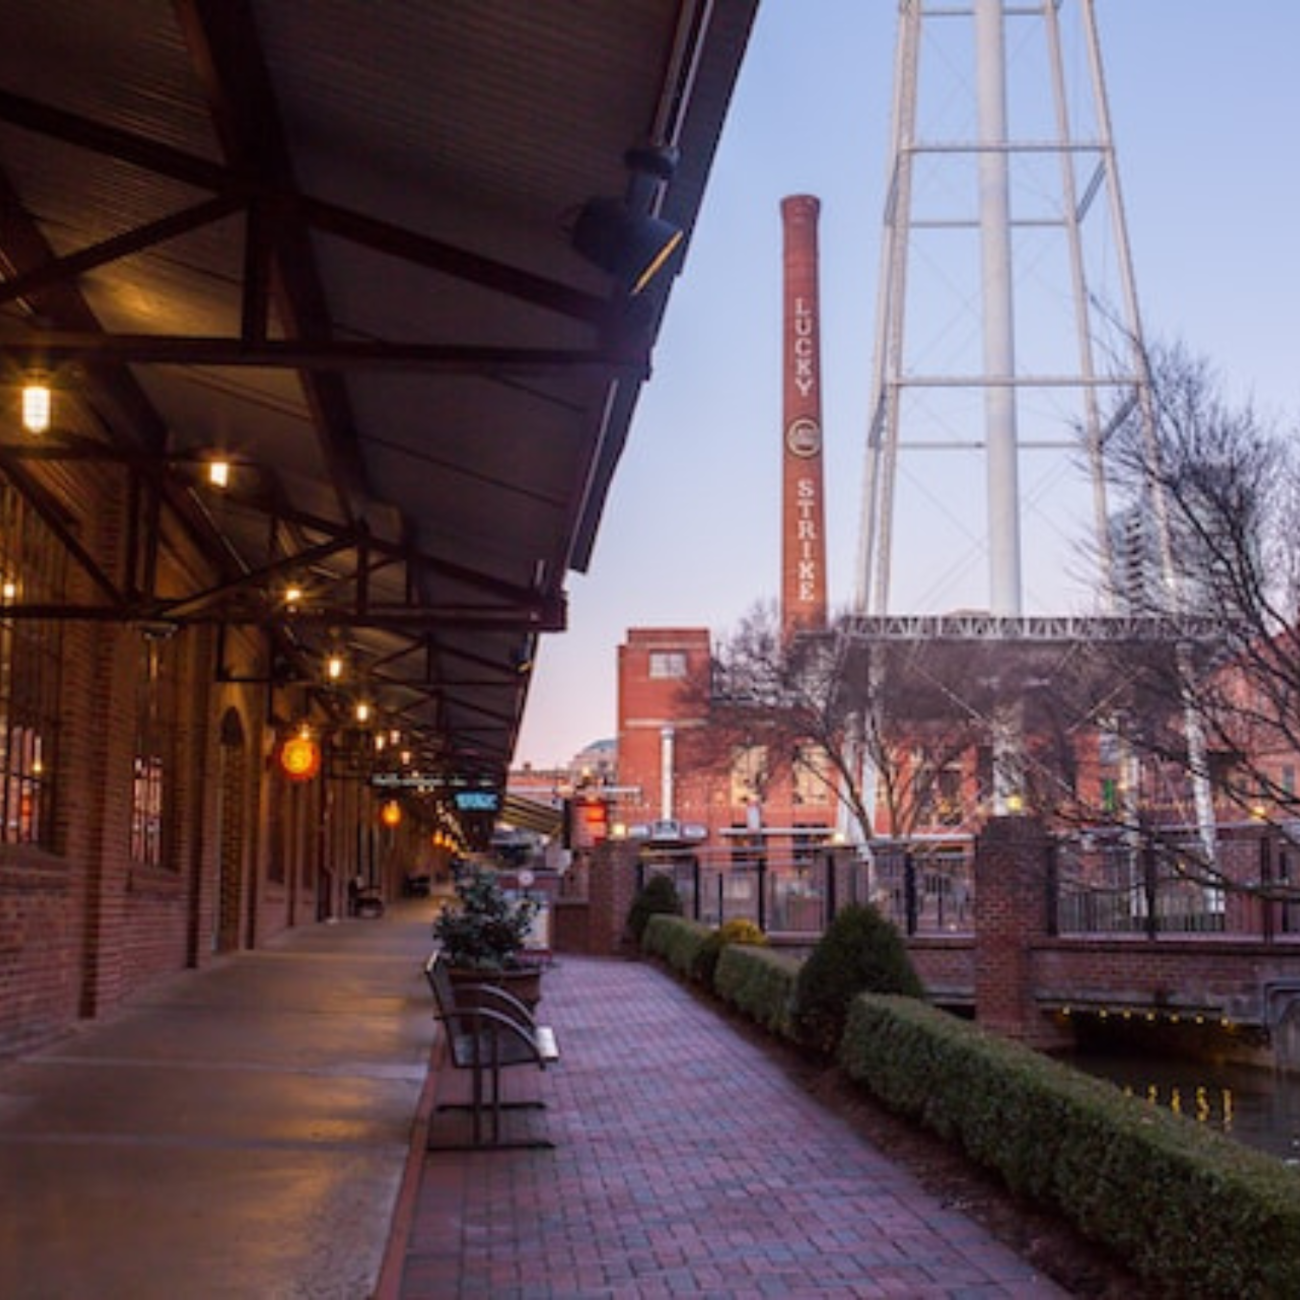 a brick sidewalk, next to a flowing waterway, in a busy urban center. A brick tower in background, next to a water tower.